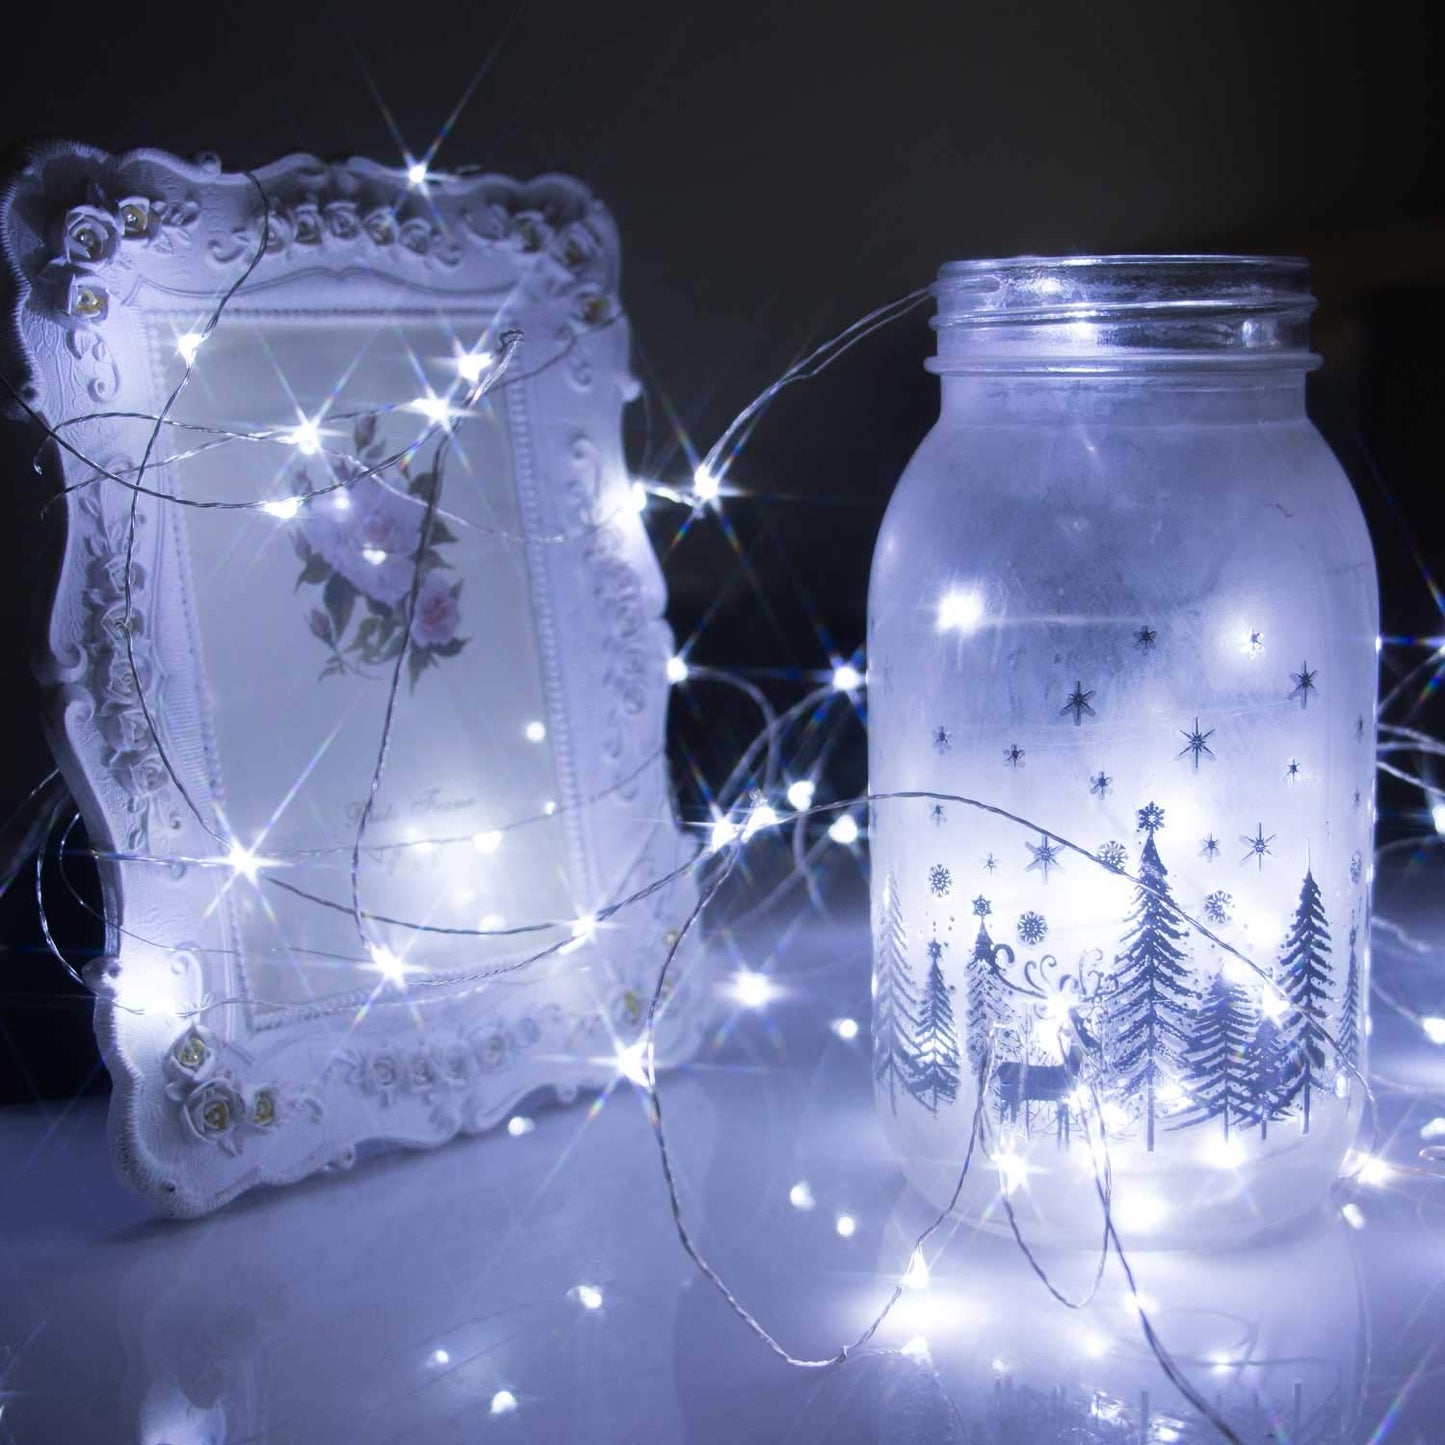 Fairy String Lights, 2 Set 33ft 100 Led Fairy Lights Battery Operated Silver Wire Lights with Remote Control, 8 Mode Waterproof Lights for Home Garden Bedroom Centerpiece Wedding Party (Cool White)